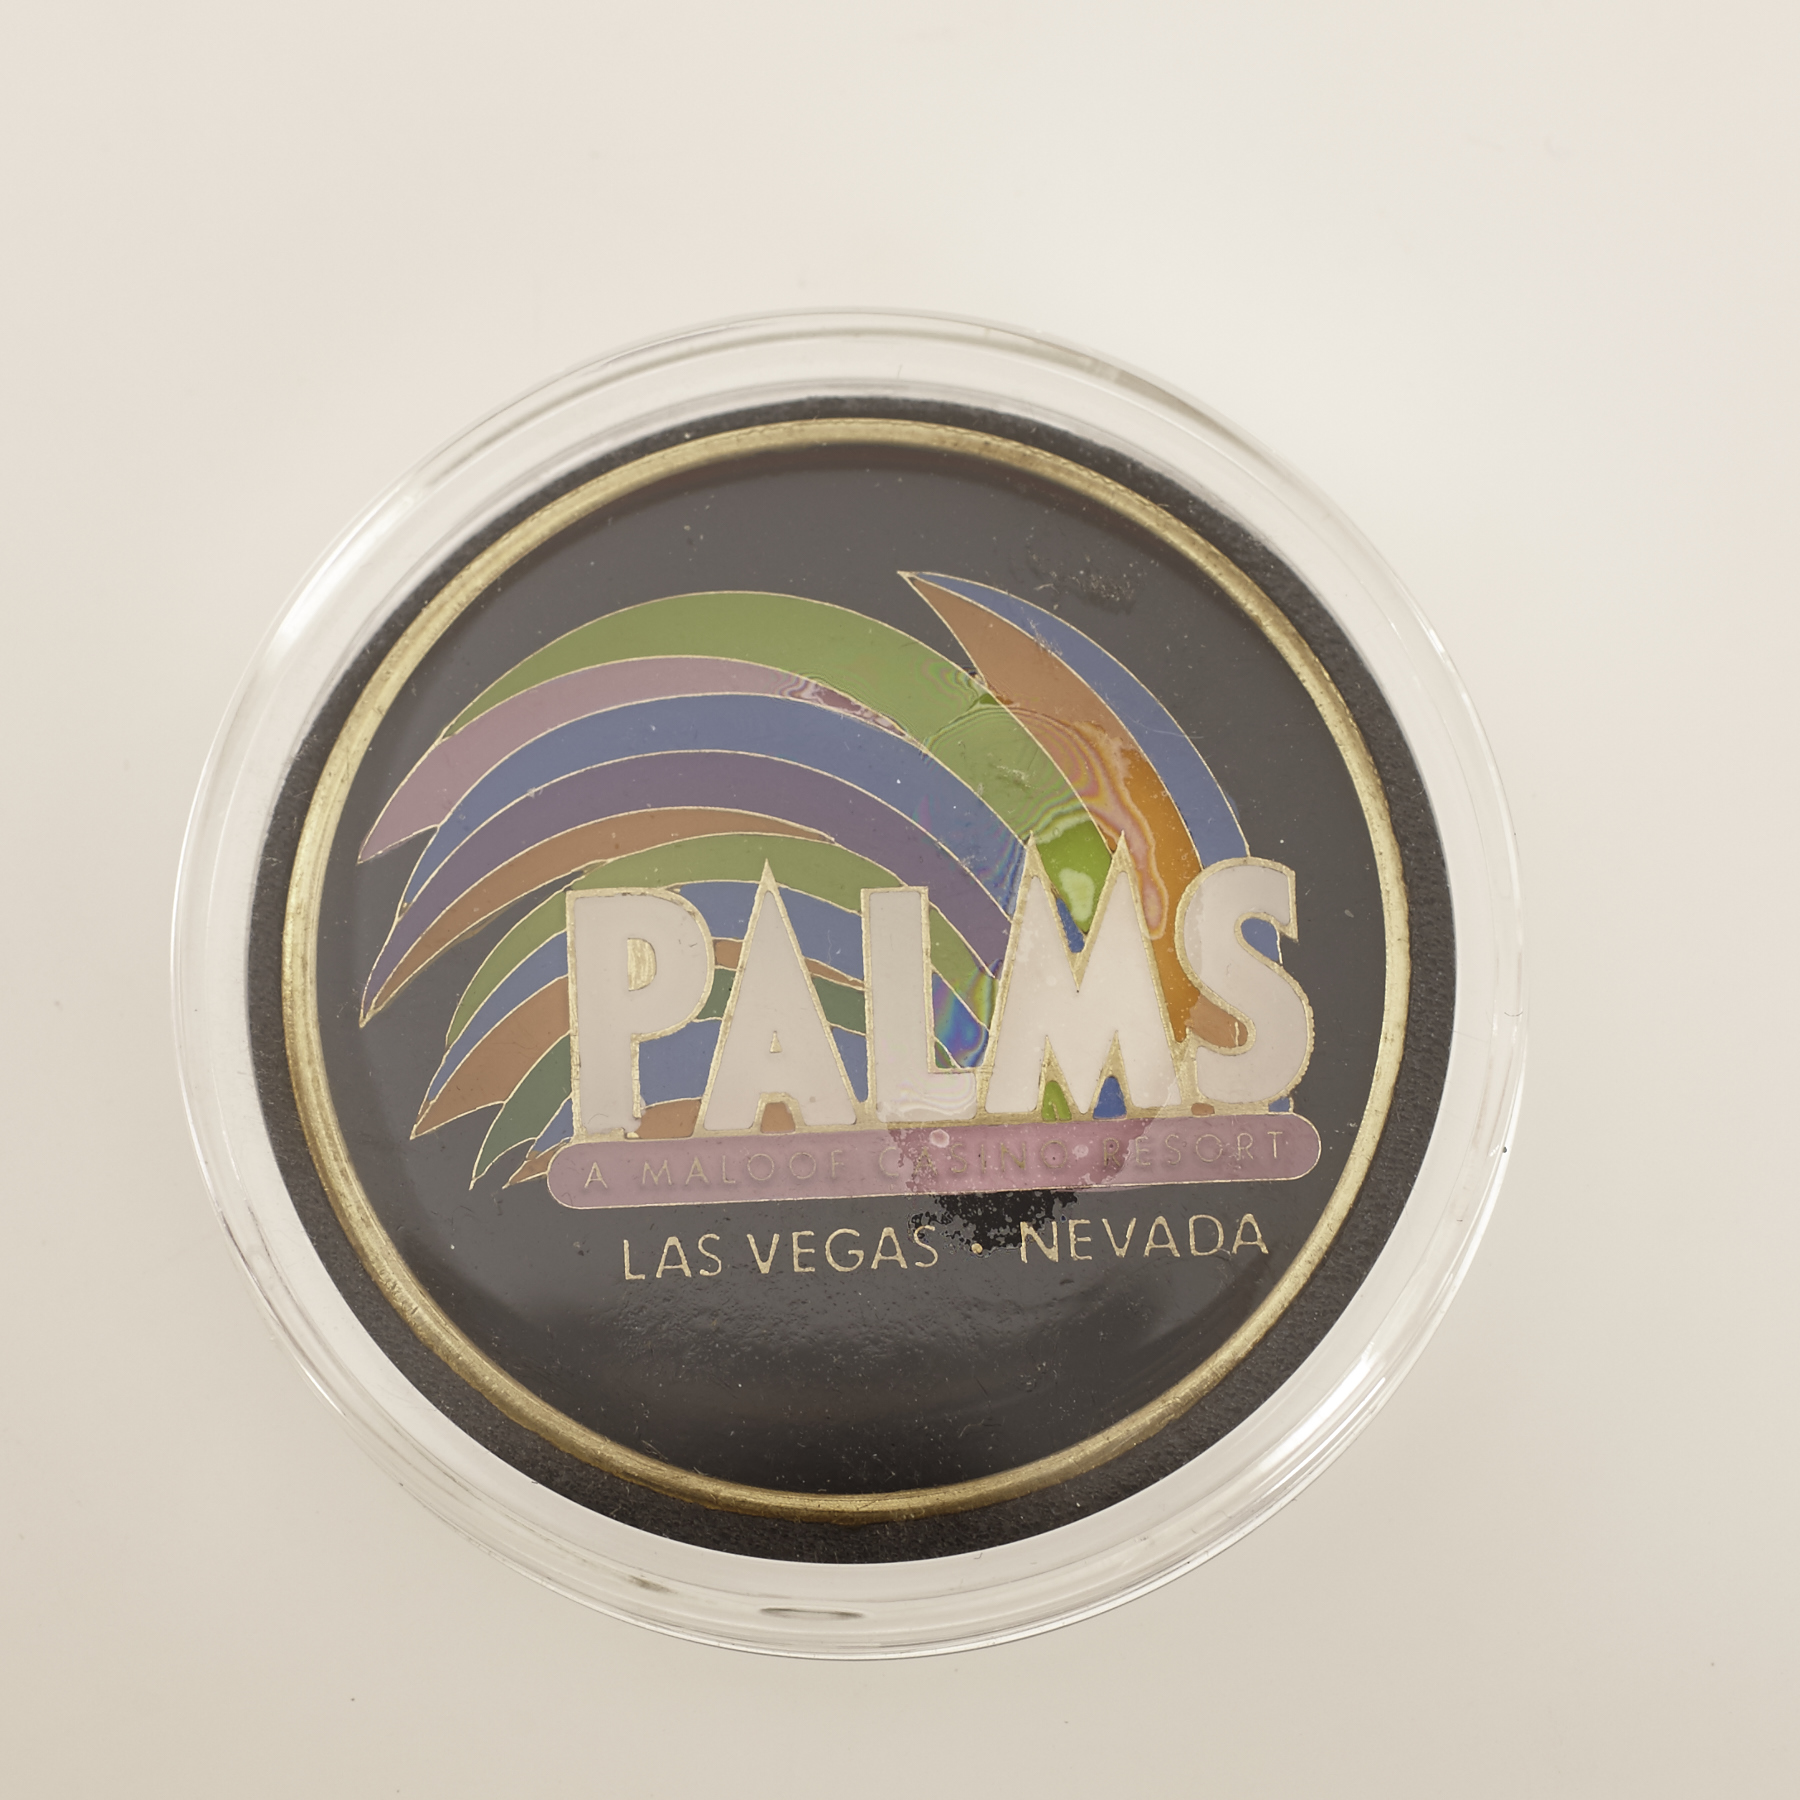 PALMS, NO LIMIT HOLD’EM, SUMMER SERIES, FINAL TABLE, Poker Card Guard